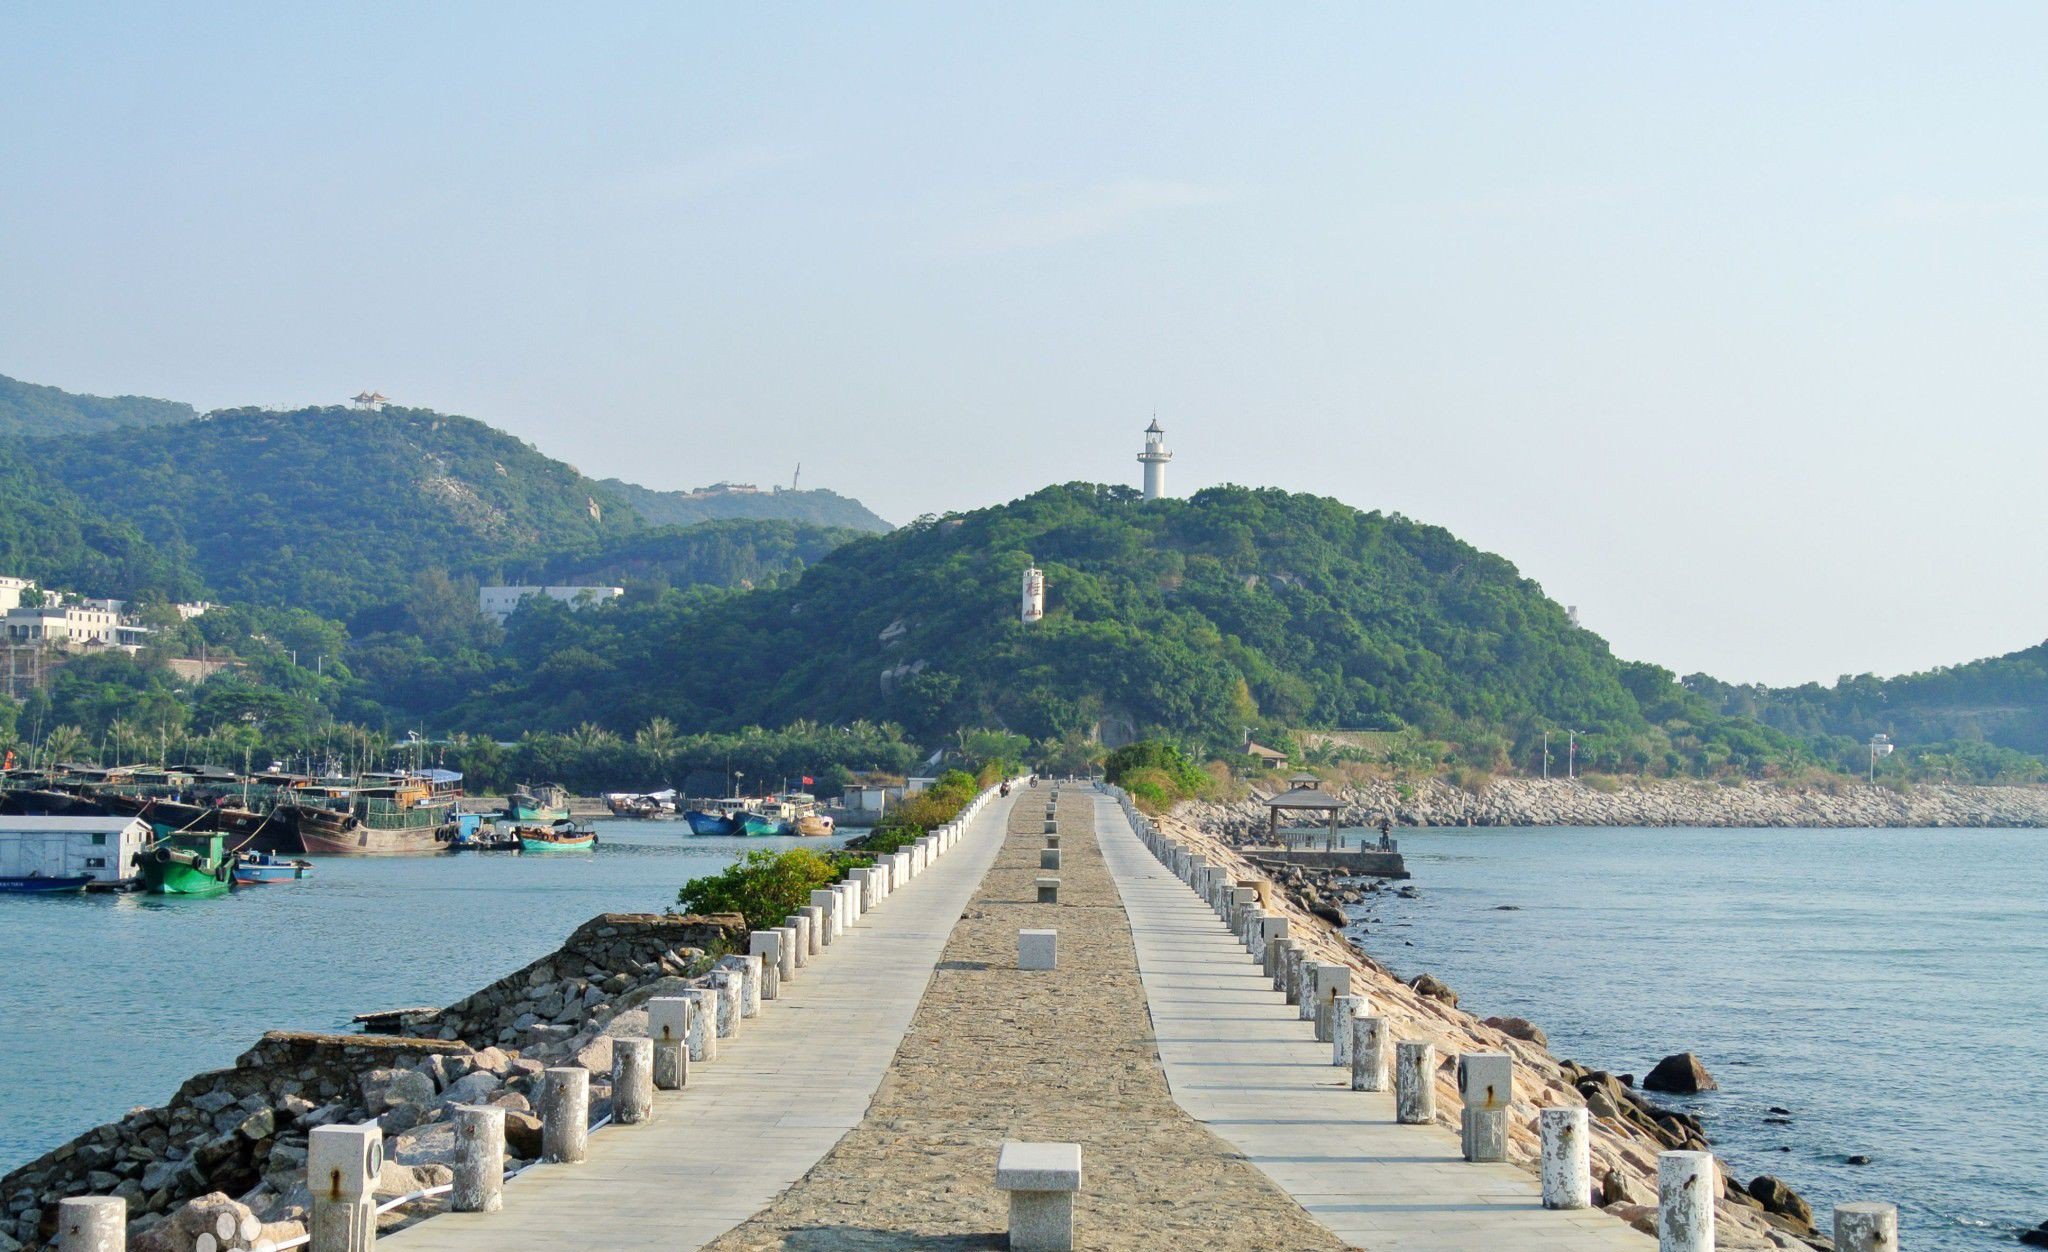 Guishan Island could be a better source of land than large-scale reclamation, given Beijing’s support for Hong Kong’s role in the Greater Bay Area scheme as a transport and logistics hub – if we can articulate the benefits to Zhuhai. Photo: Handout